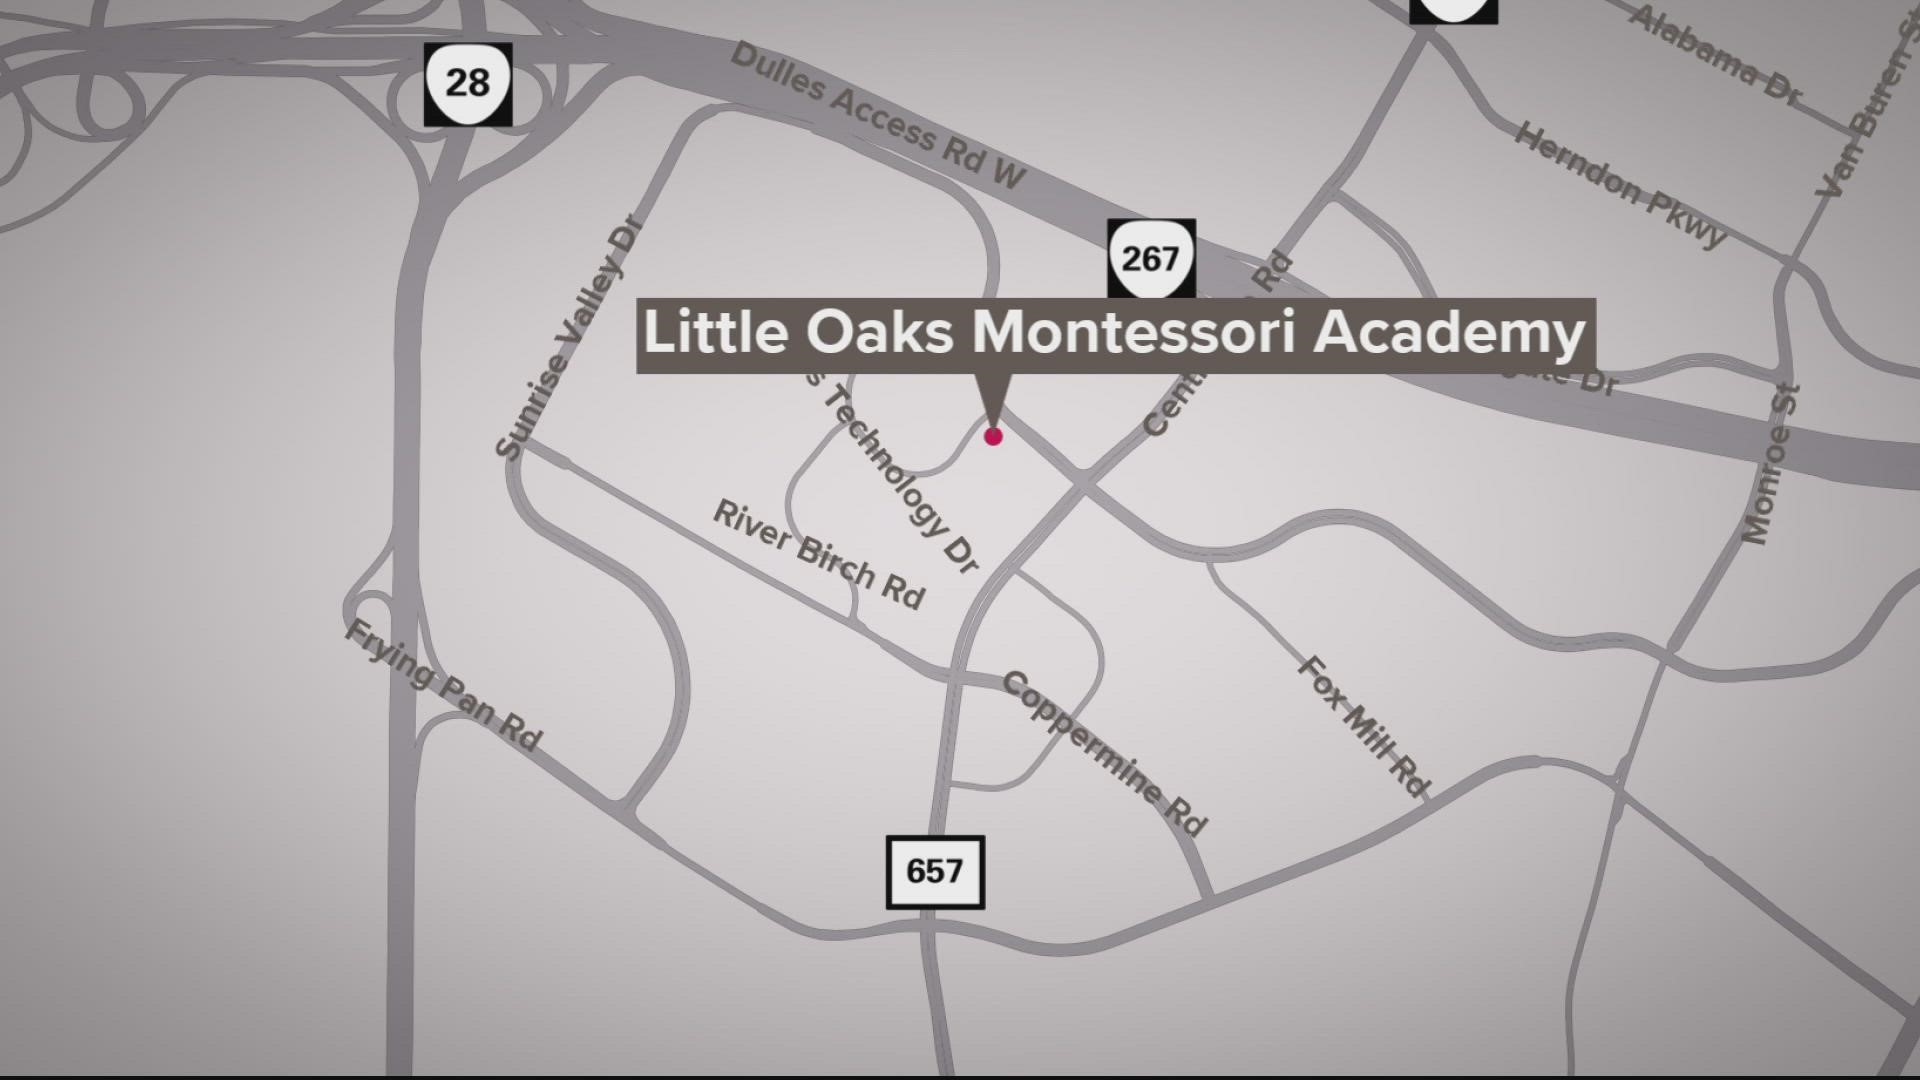 Police say a daycare worker is charged with assaulting a toddler. It happened last month at the Little Oaks Montessori Academy on Dulles Technology Drive.